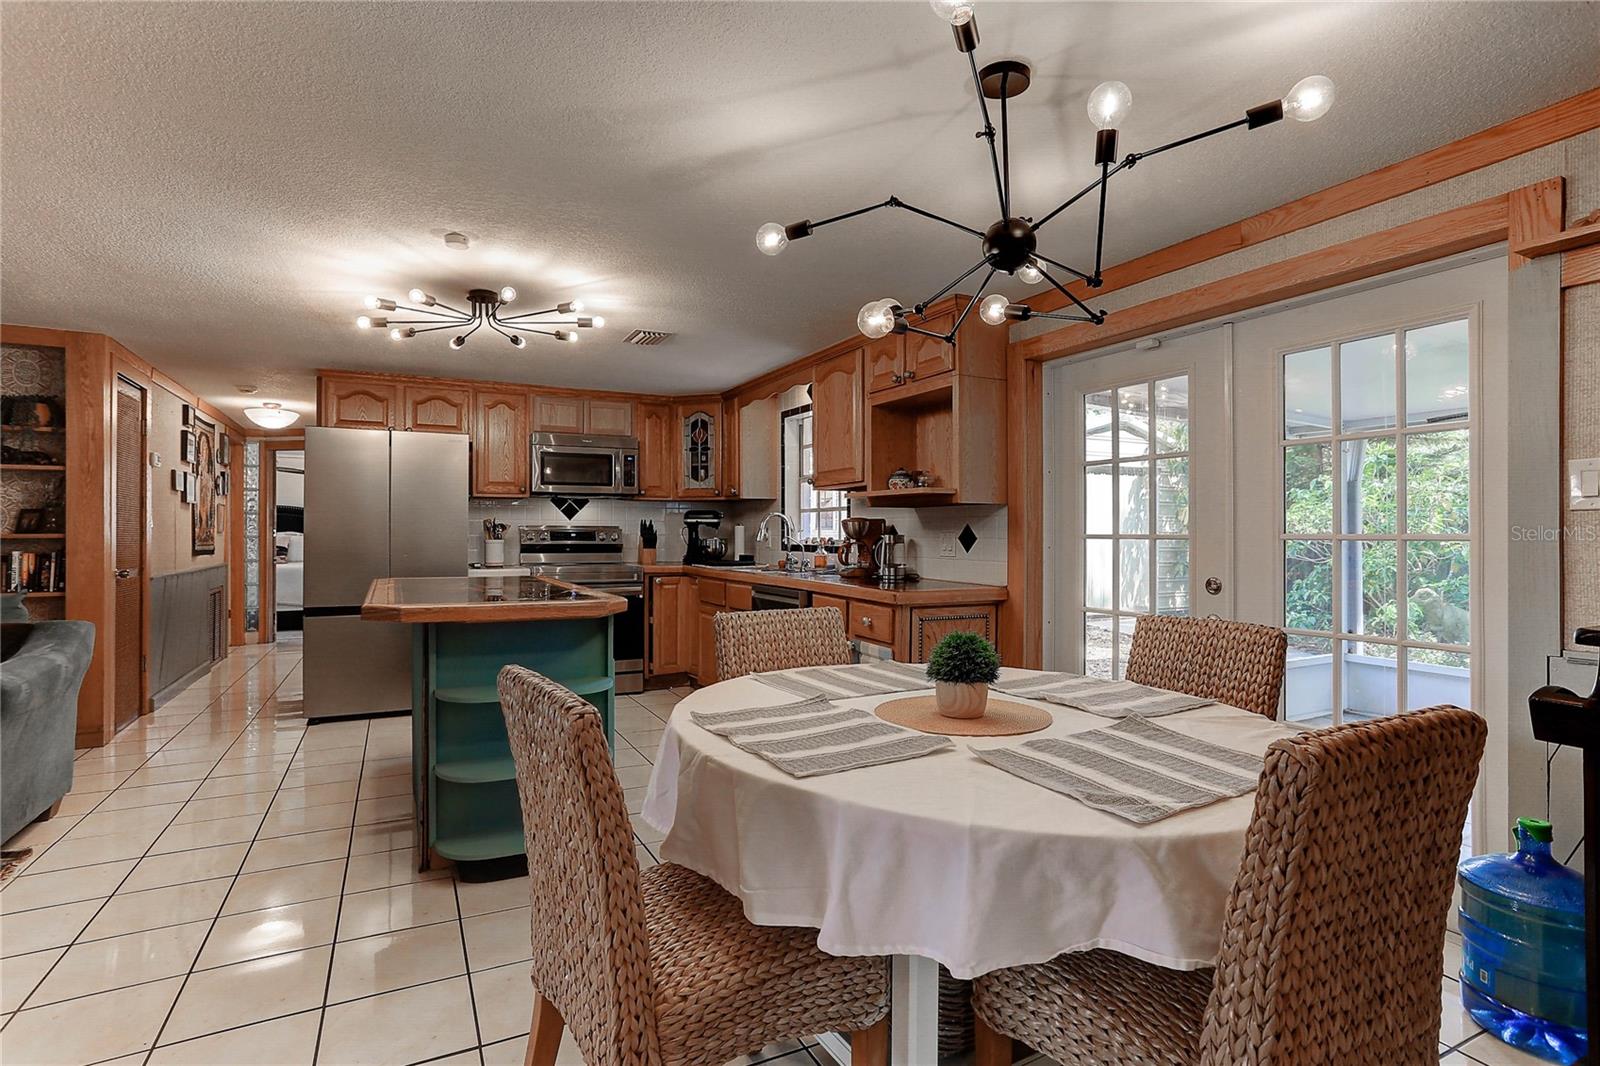 Dinette and kitchen view.  French doors lead to screened porch with ceiling fan.